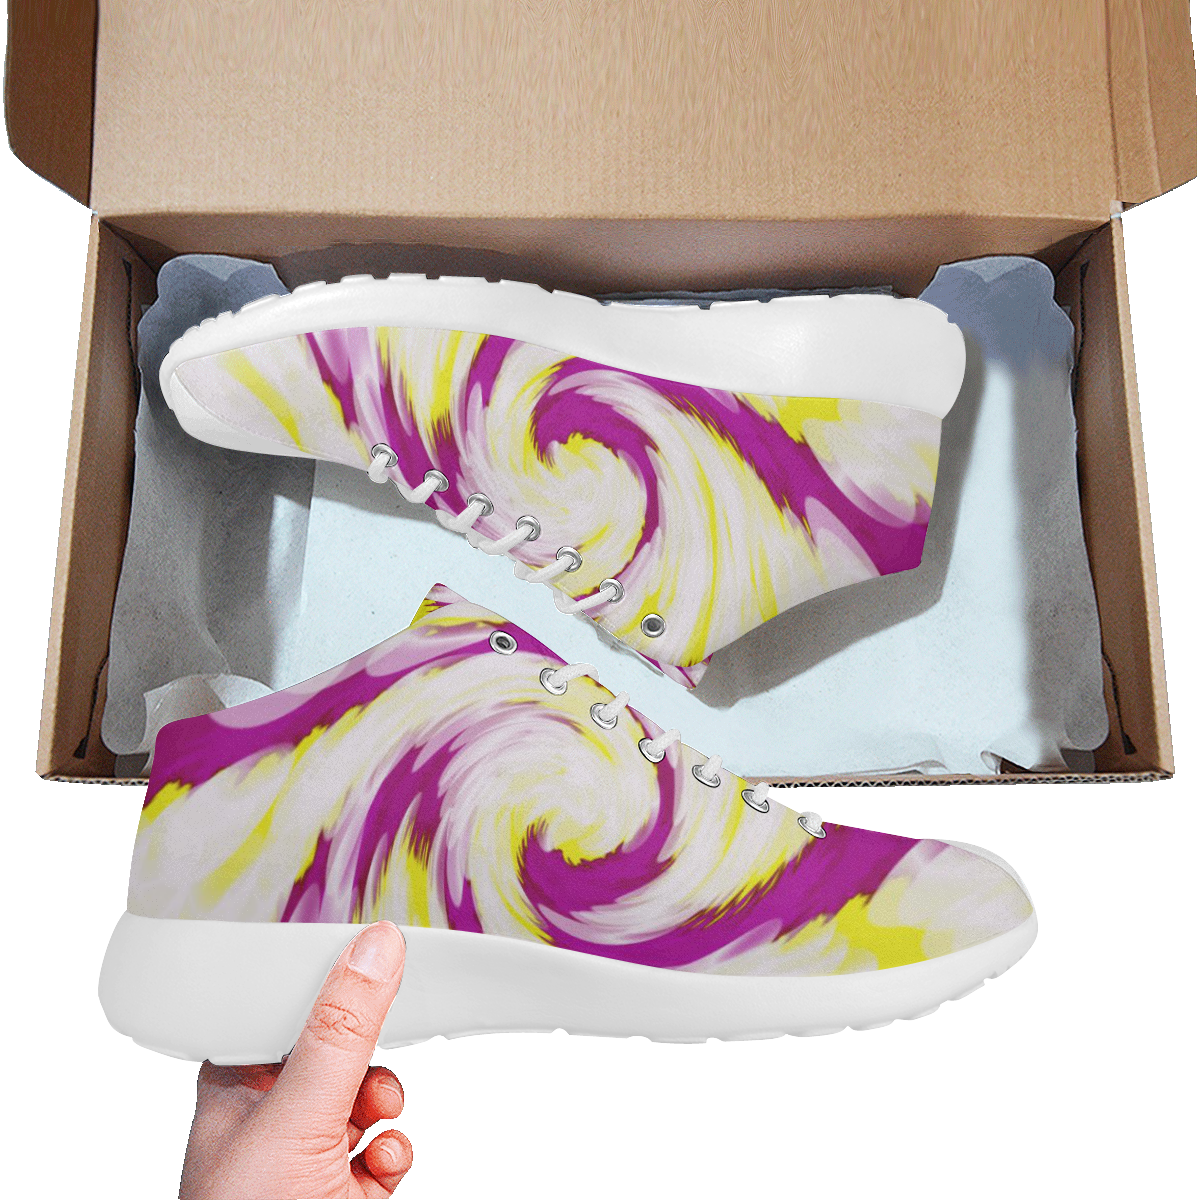 Pink Yellow Tie Dye Swirl Abstract Women's Basketball Training Shoes/Large Size (Model 47502)